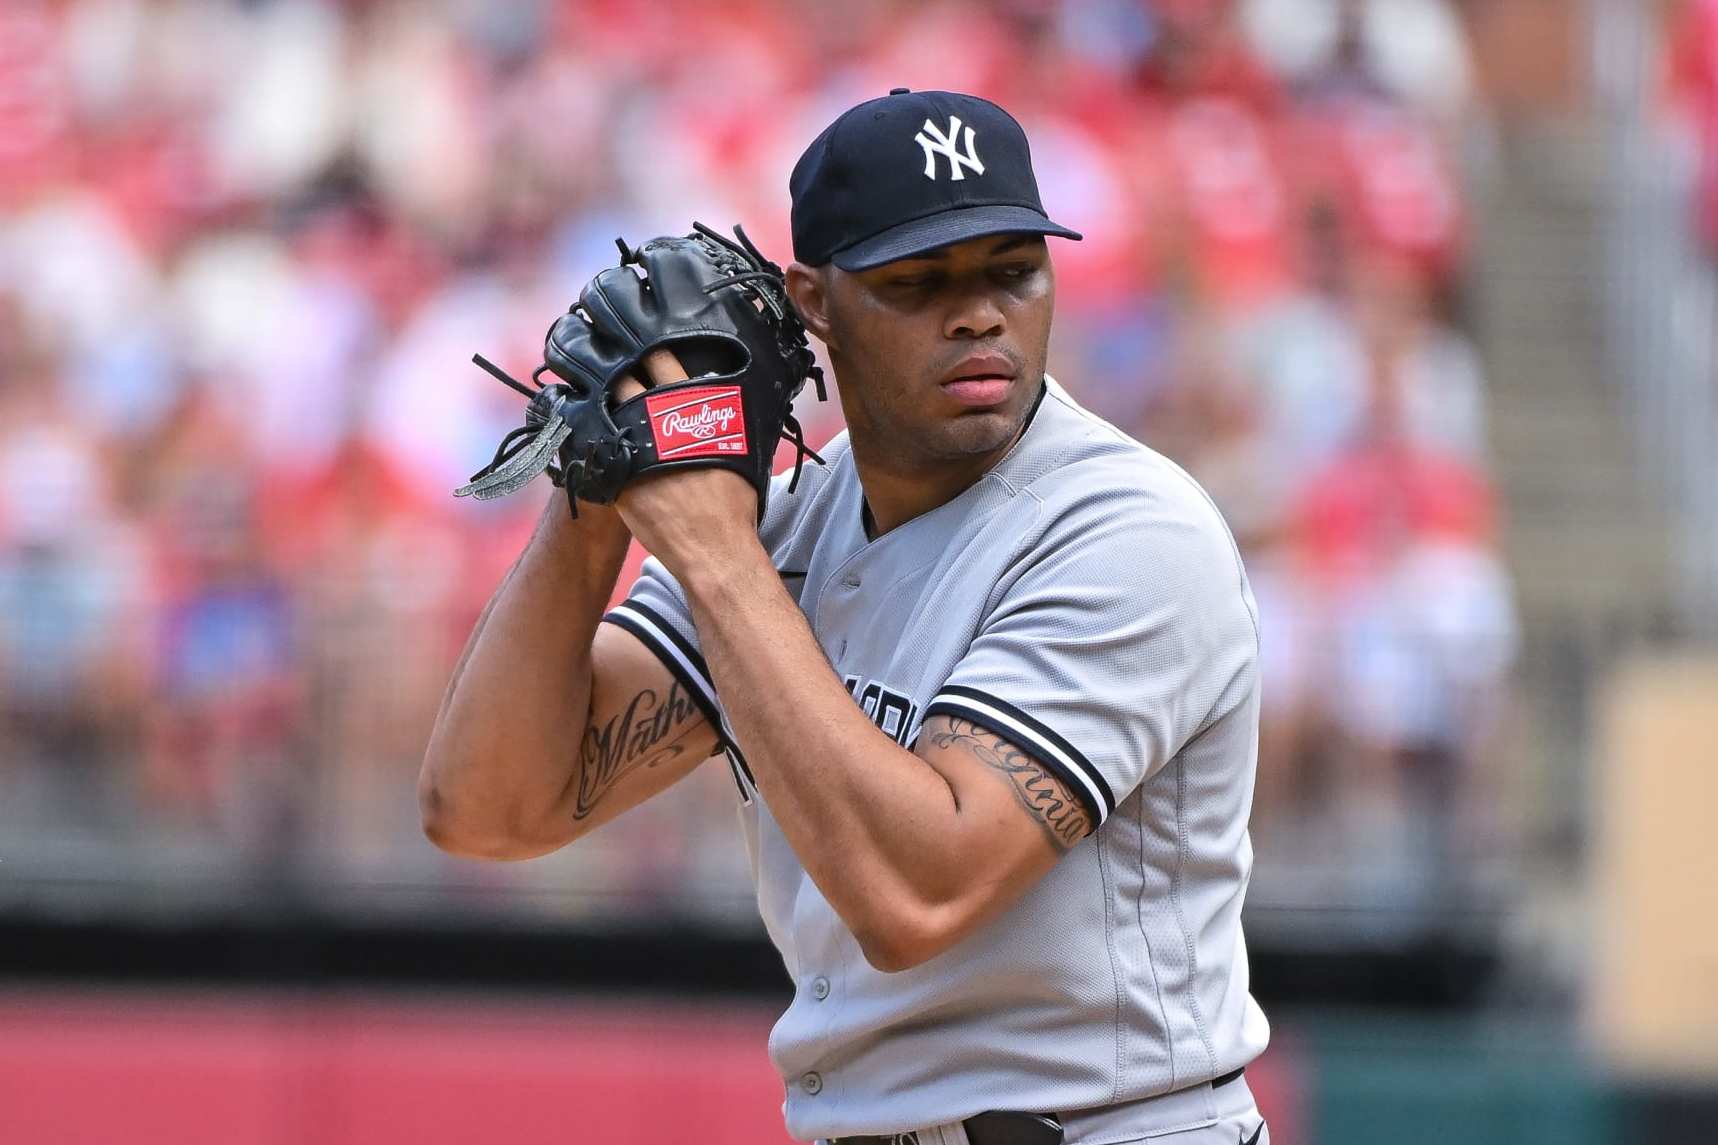 Yankees pitcher Cordero is suspended for the rest of the season under MLB's  domestic violence policy - NBC Sports